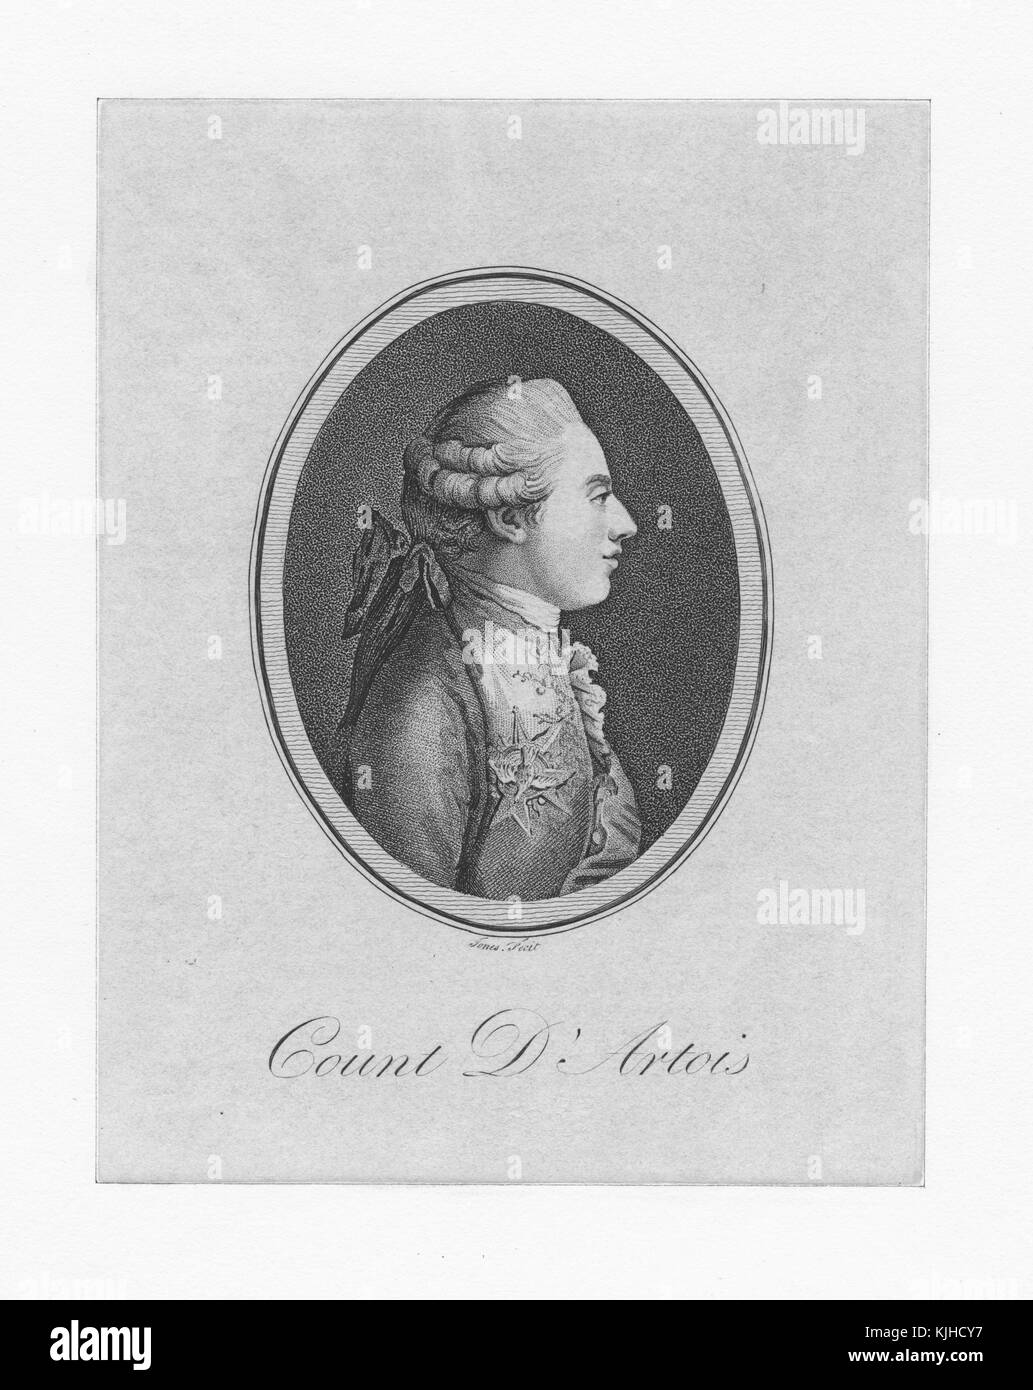 Engraved portrait of Charles X of France, Count D'Artois, King of France from 16 September 1824 until 2 August 1830, his rule of almost six years ended in the July Revolution of 1830, which resulted in his abdication, France, 1829. From the New York Public Library. Stock Photo